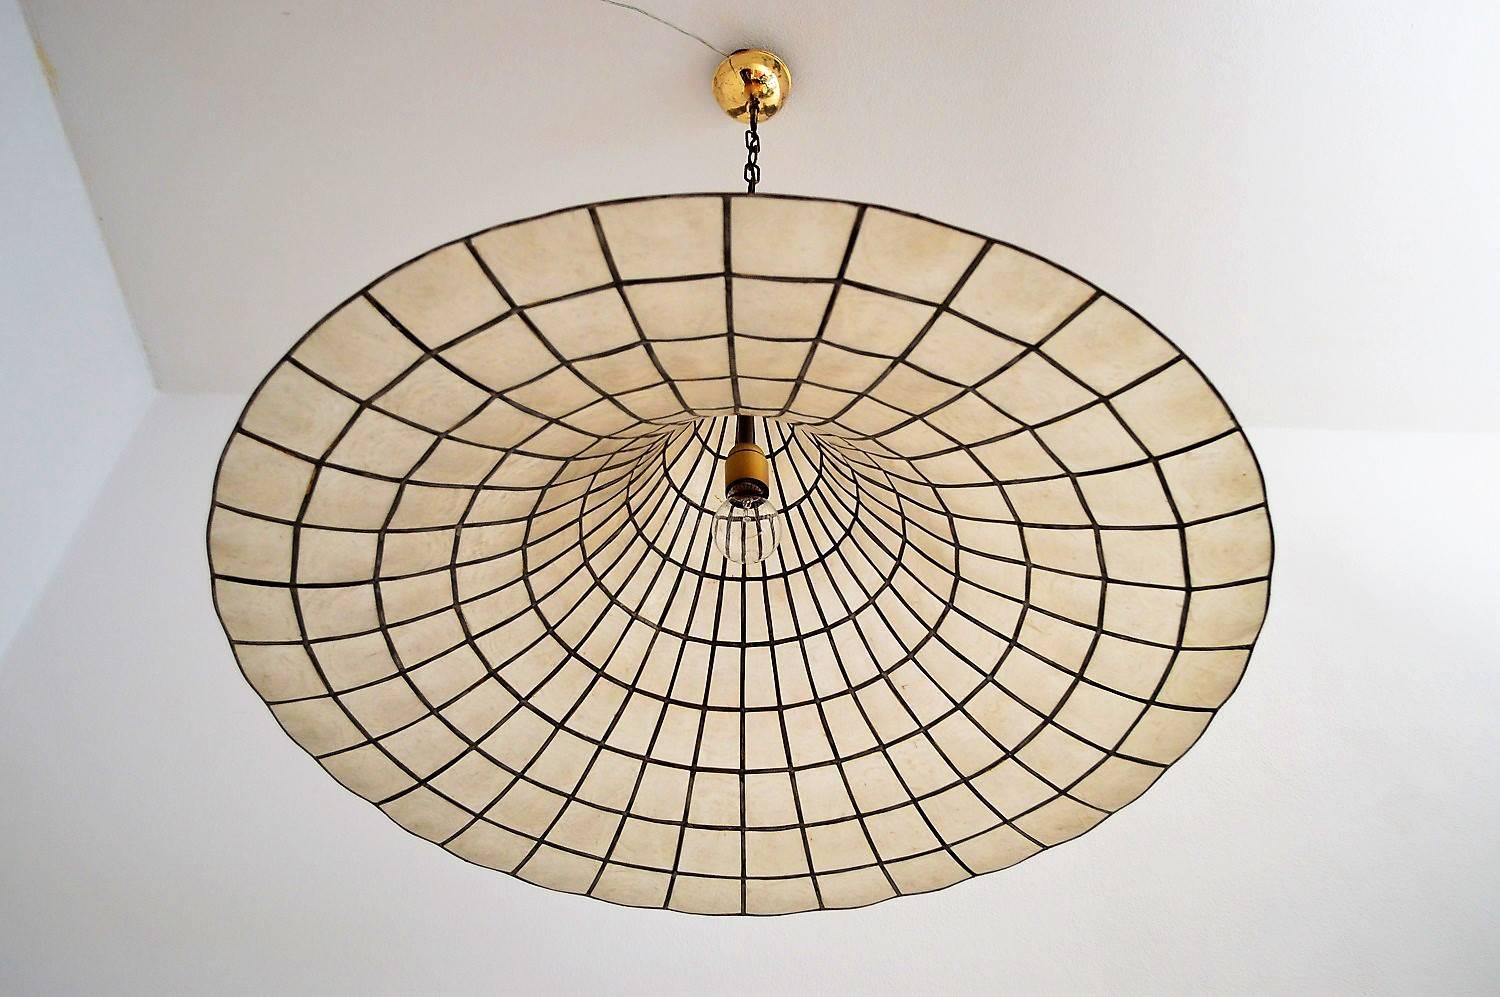 Gorgeous pendant lamp with countless mother-of-pearl or nacre pieces and brass details forming a hugh magic hat.
Stunning piece, checked and cleaned.
Excellent condition with normal signs of wear and use.